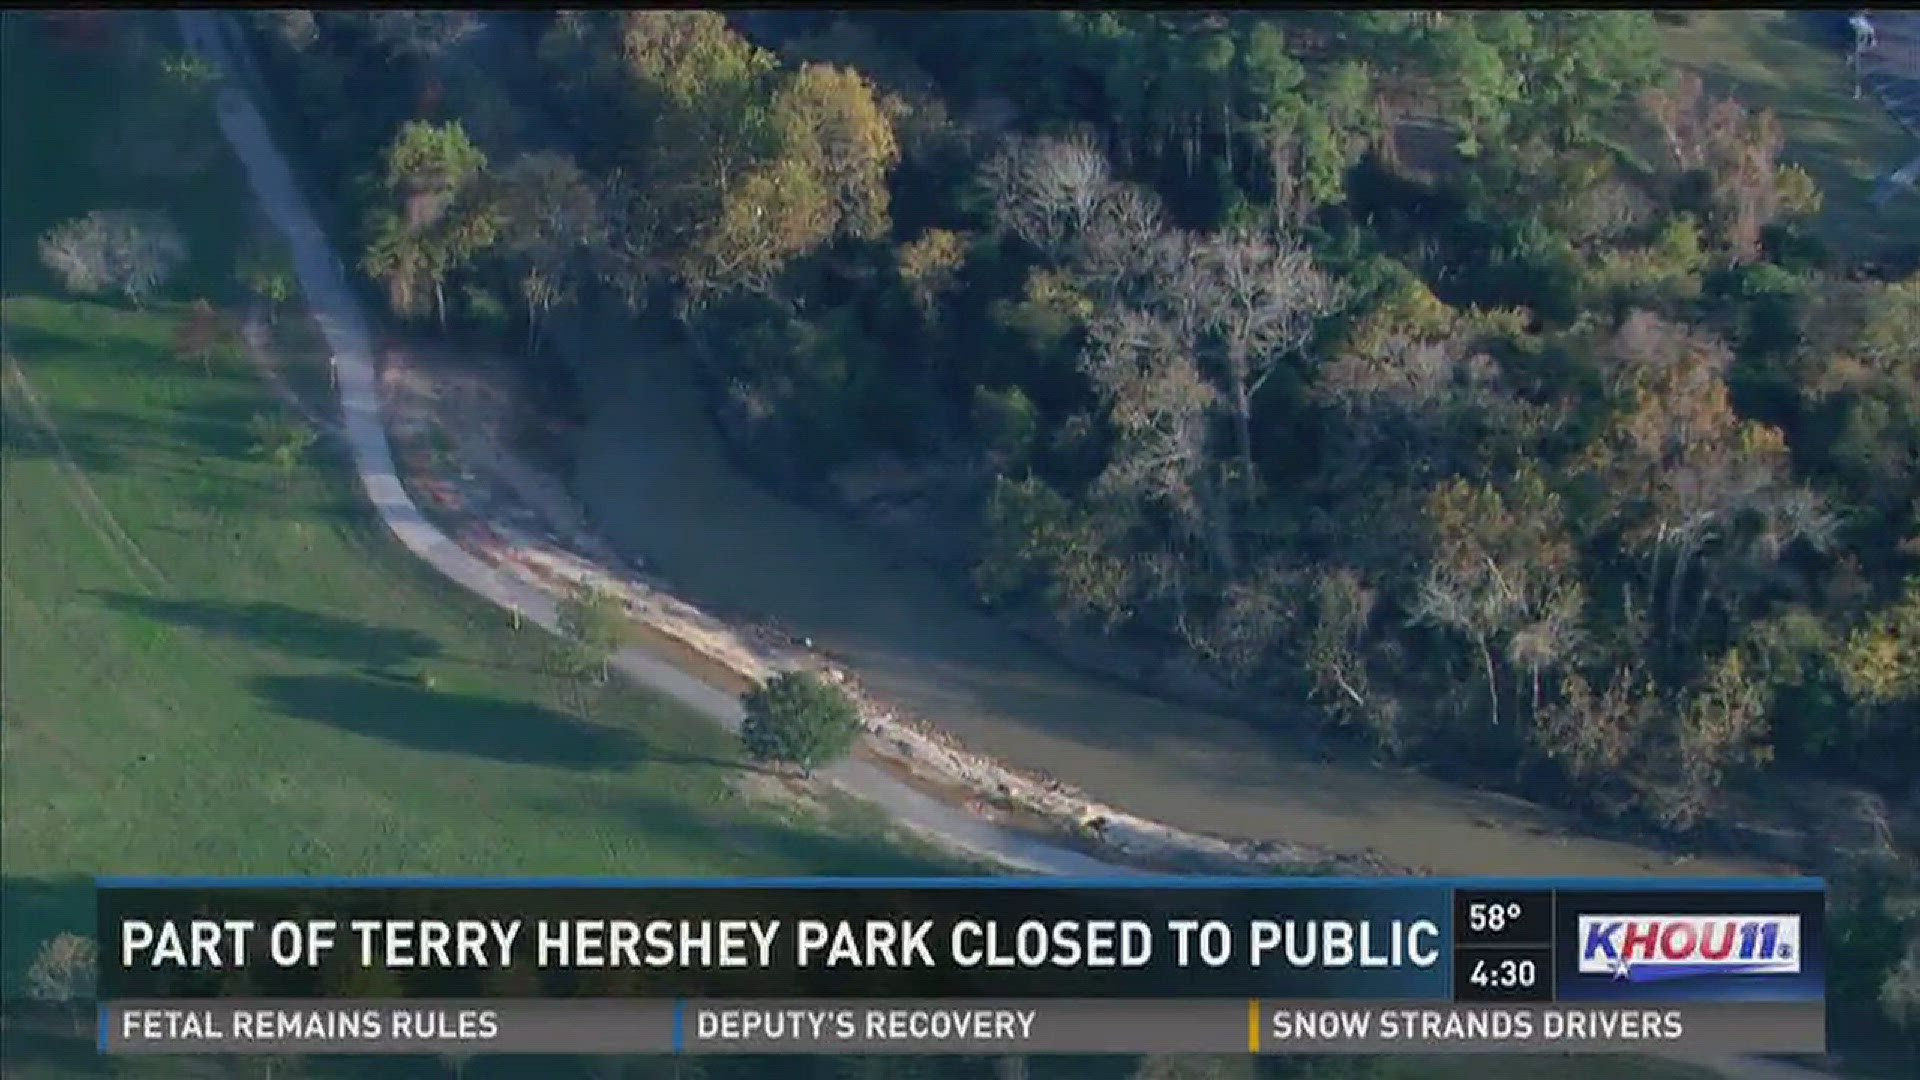 Part of Terry Hershey Park closed due to public safety concerns